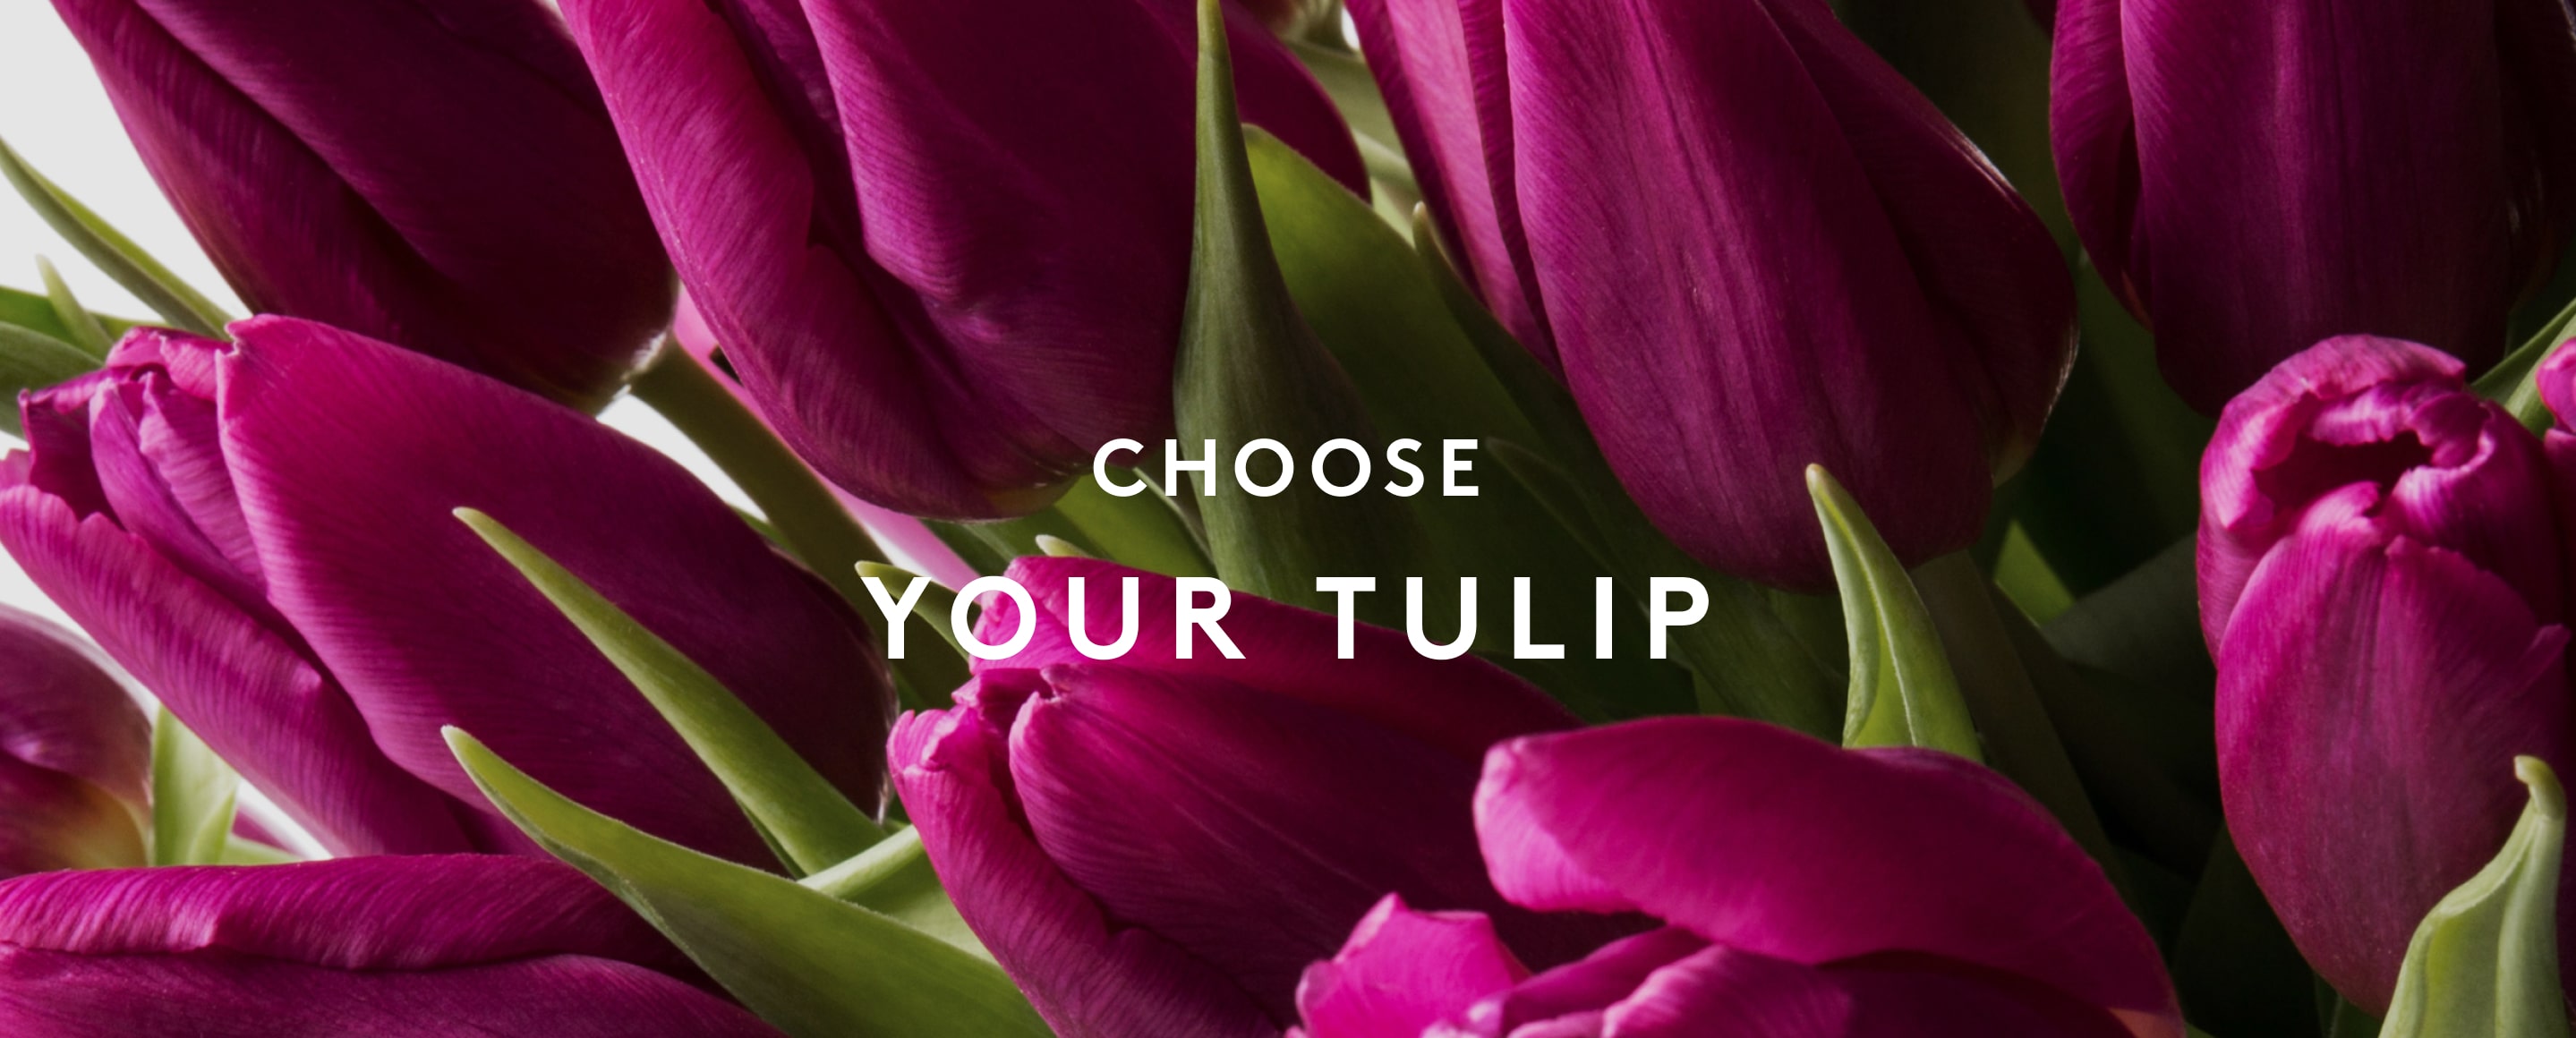 Choose your tulips